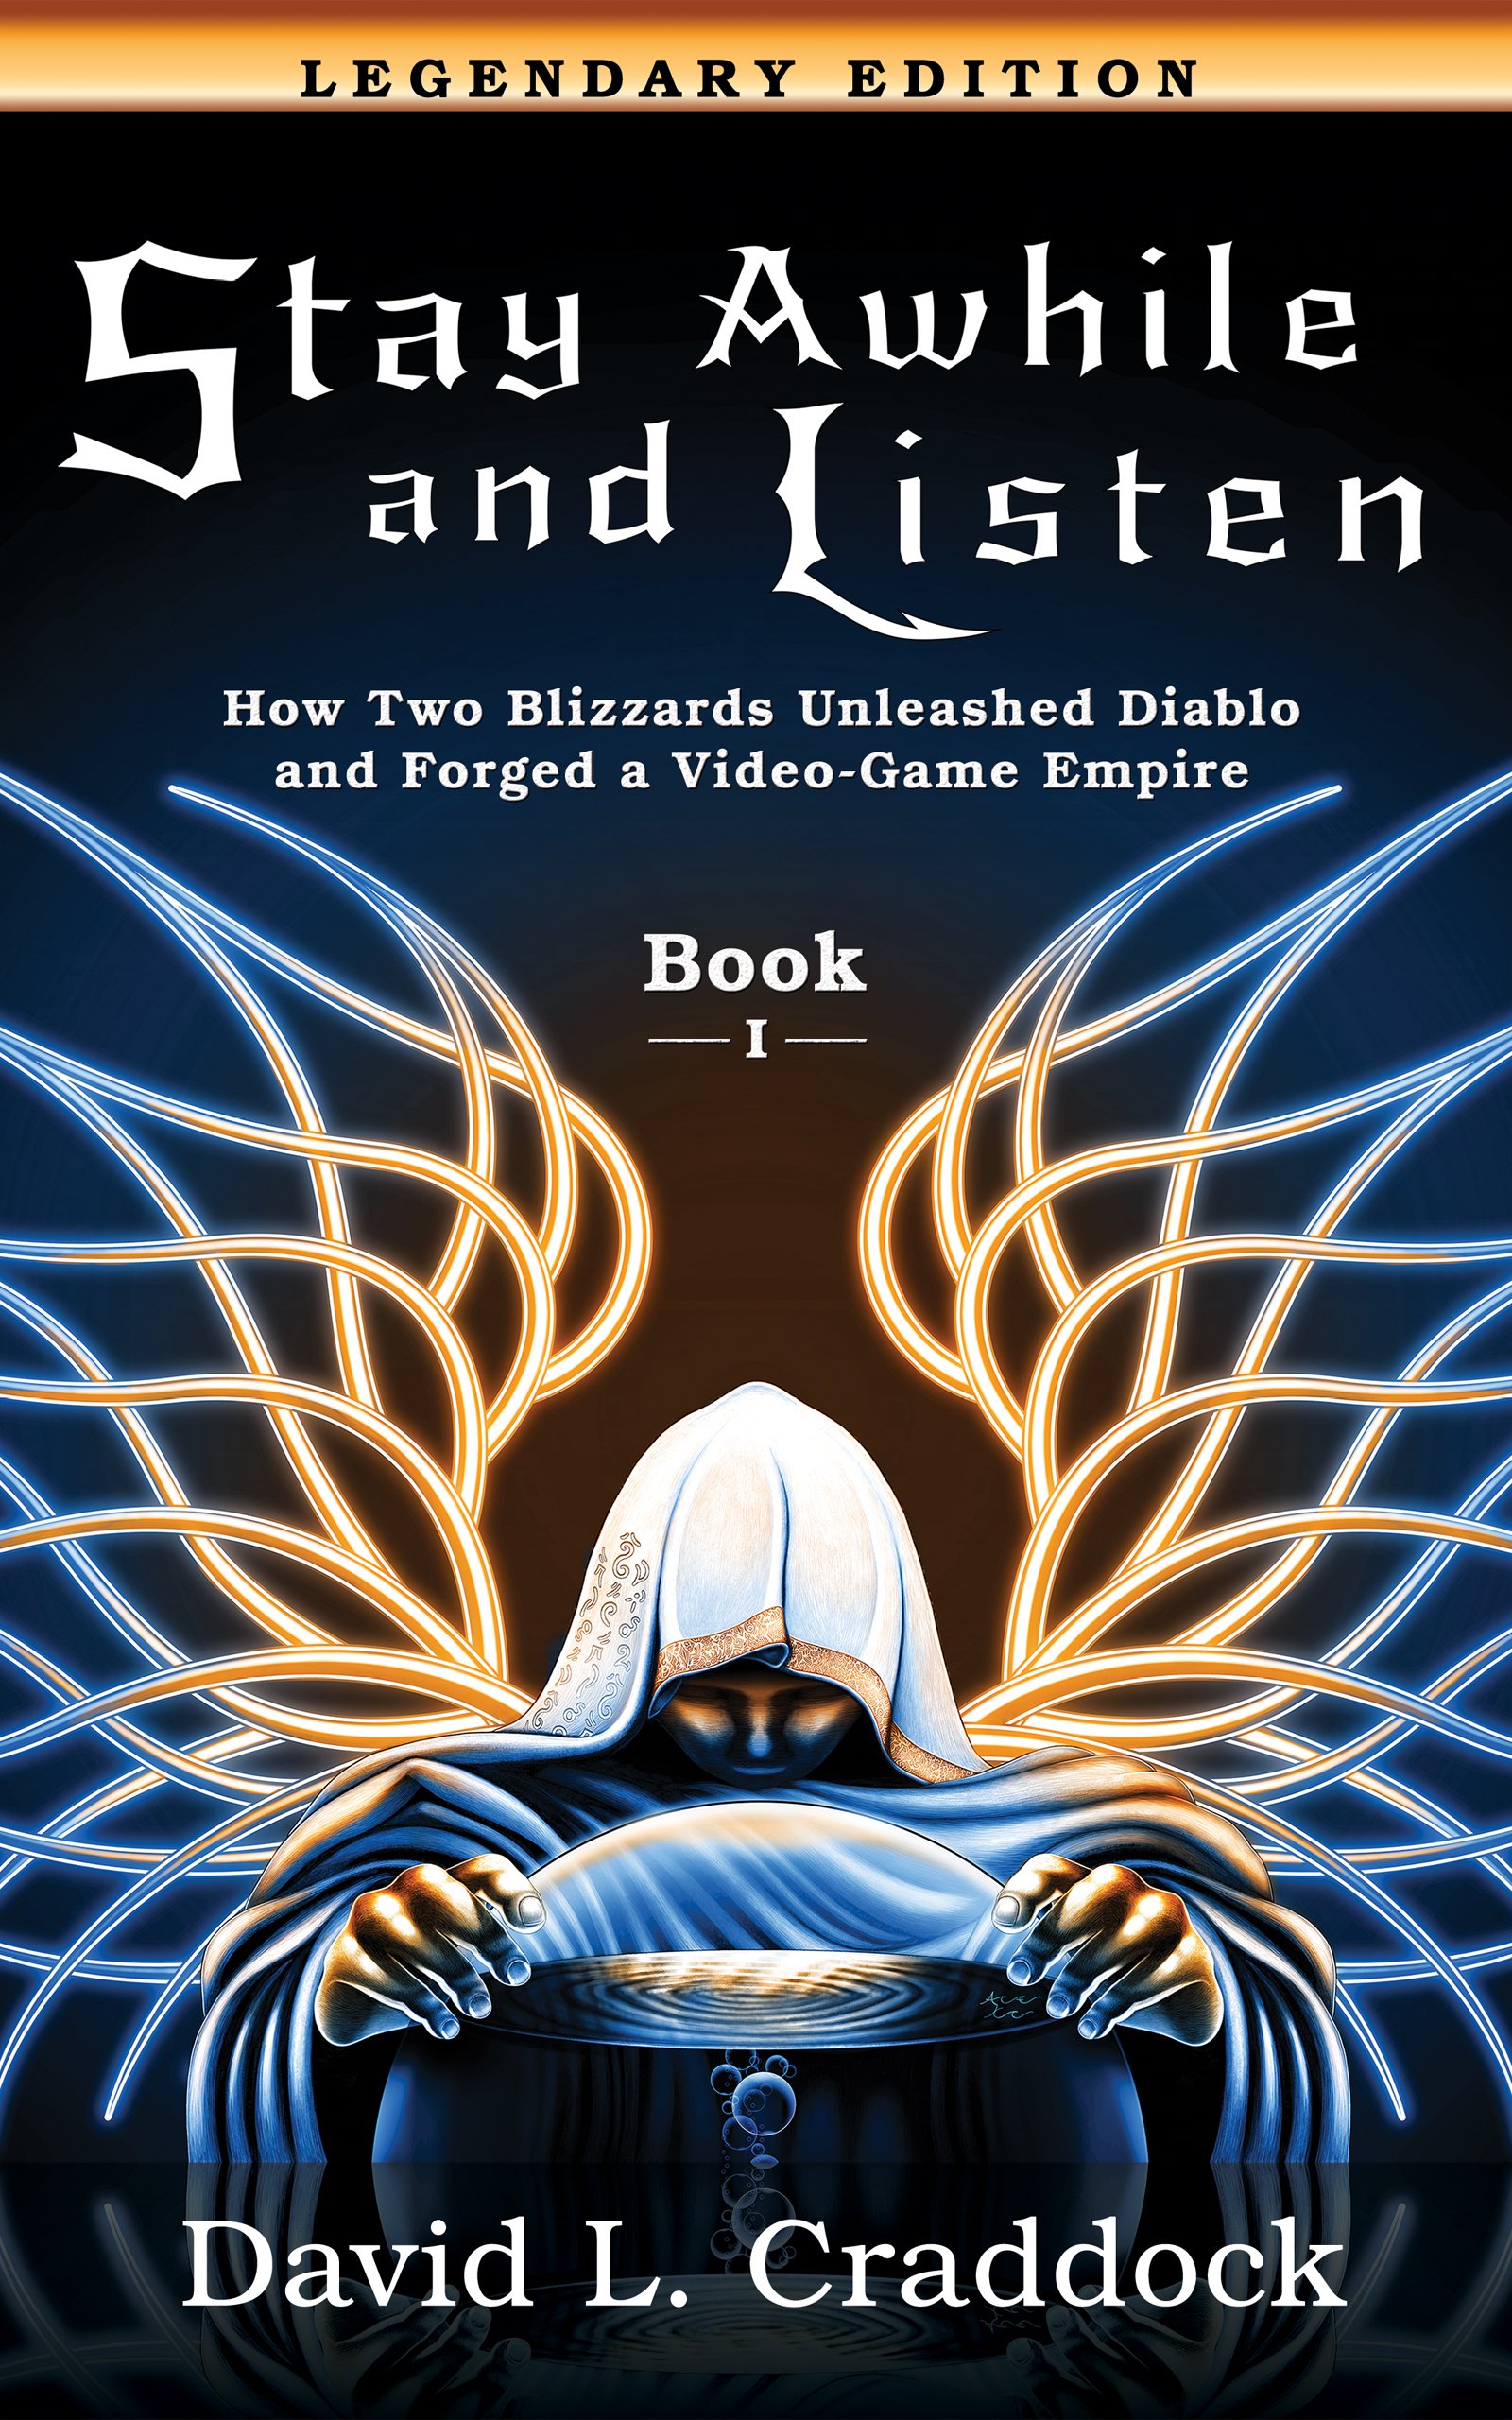 Stay Awhile and Listen: Book I Legendary Edition: How Two Blizzards Unleashed Diablo and Forged a Video-Game Empire ($0.99) Kindle eBook